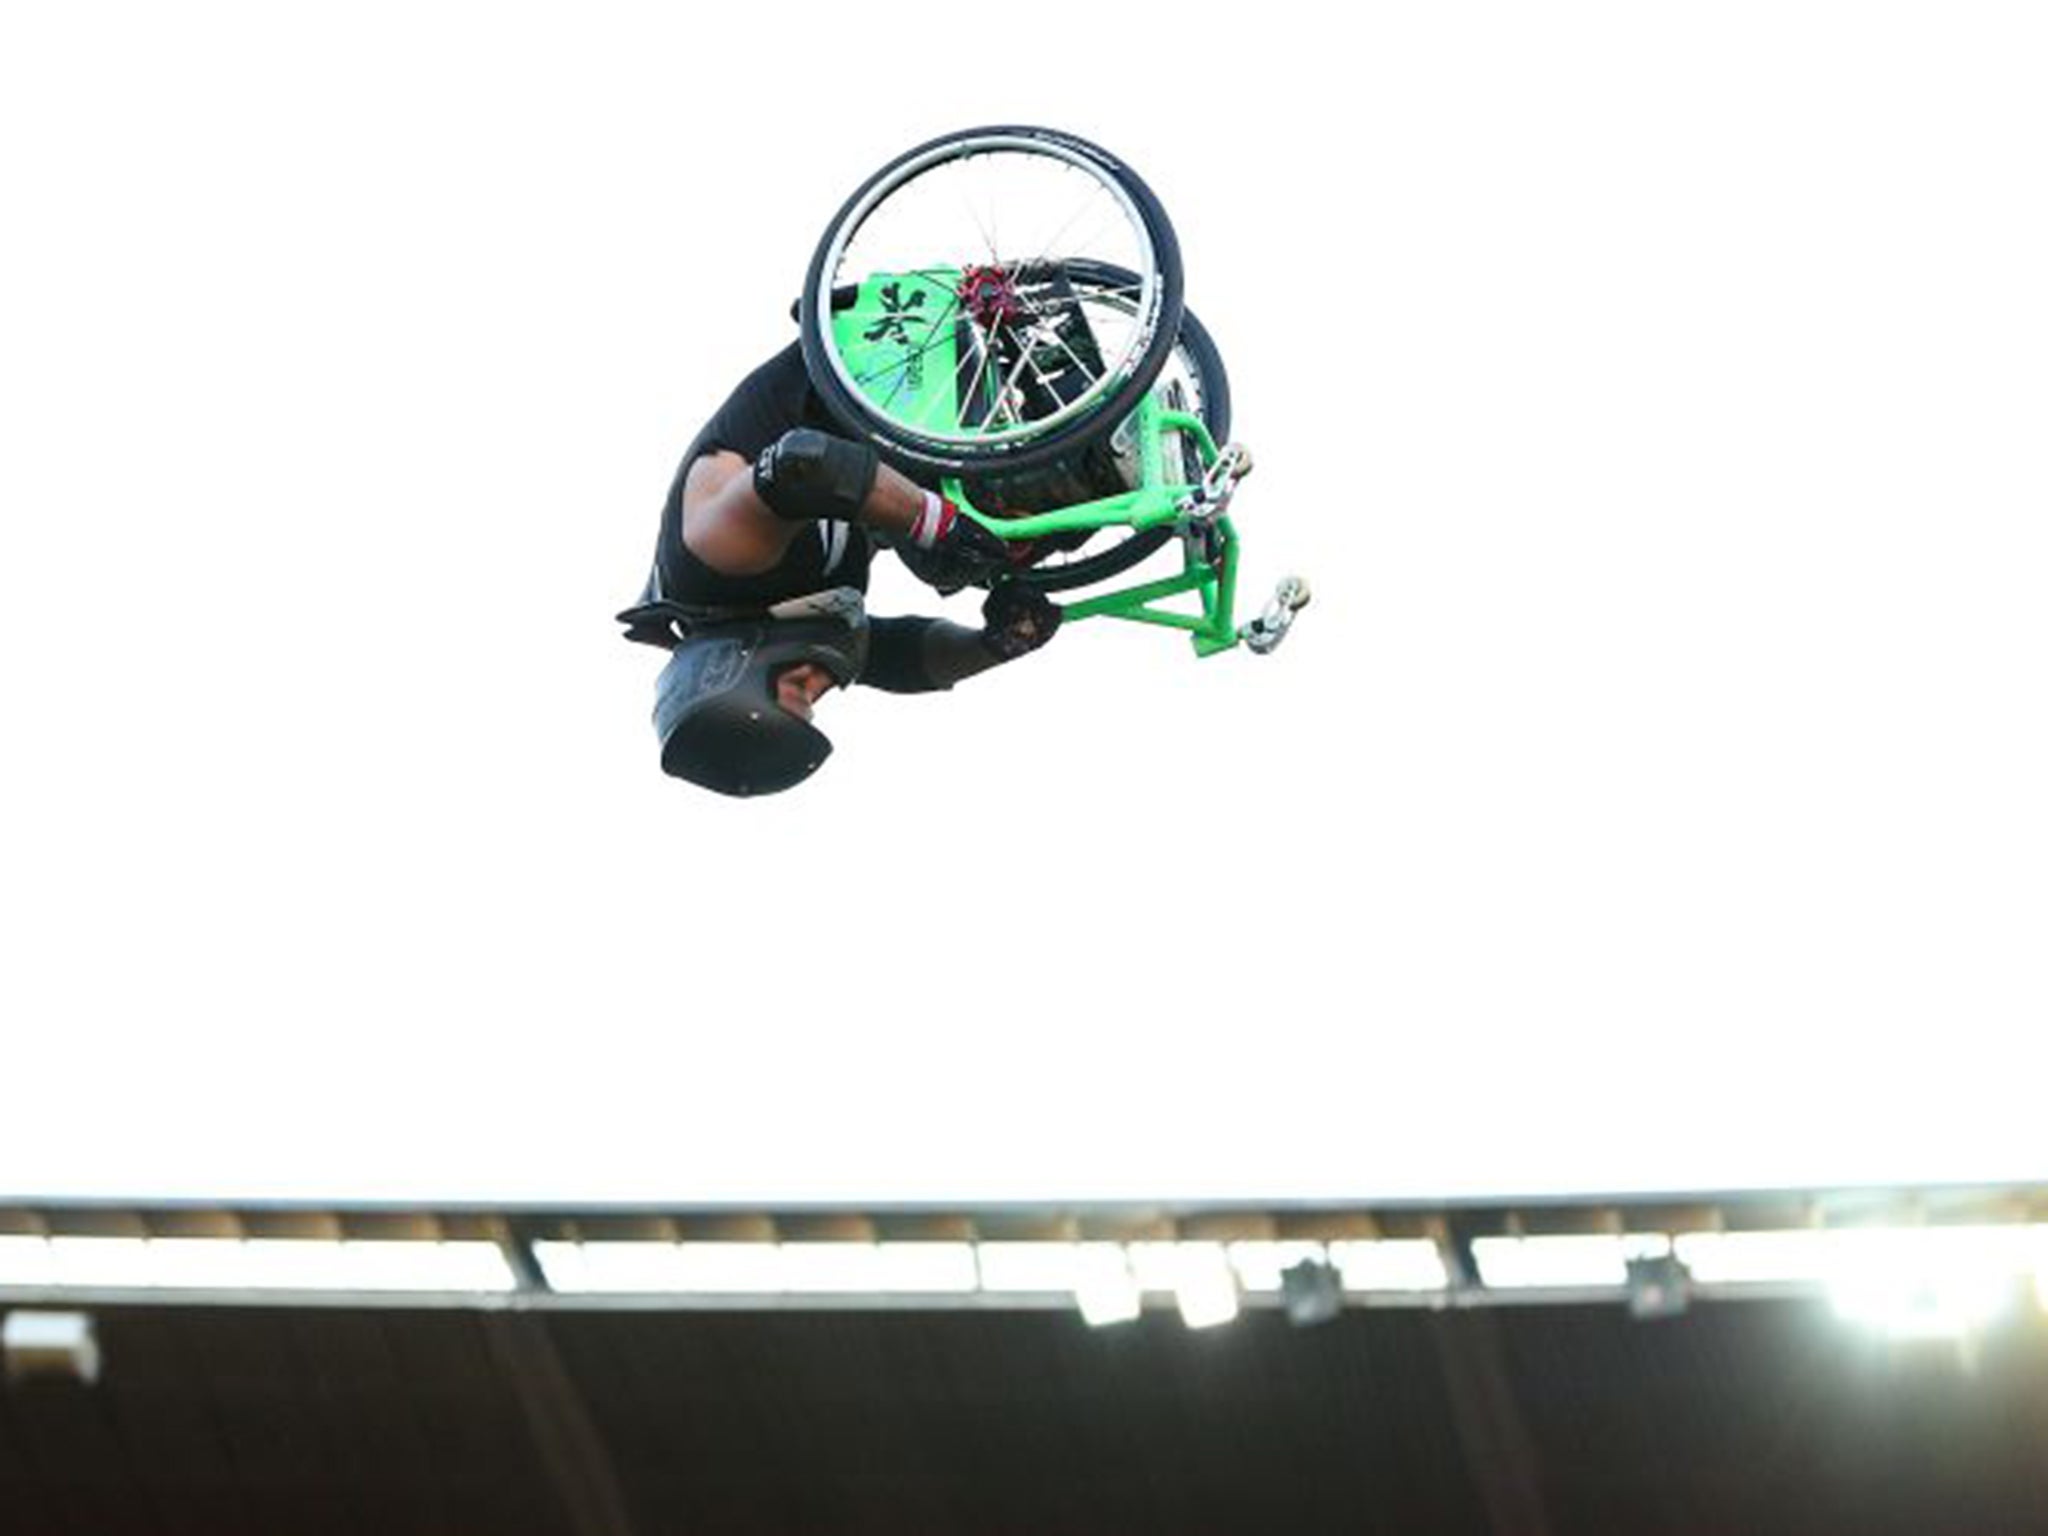 Nitro Circus comes to the UK this summer